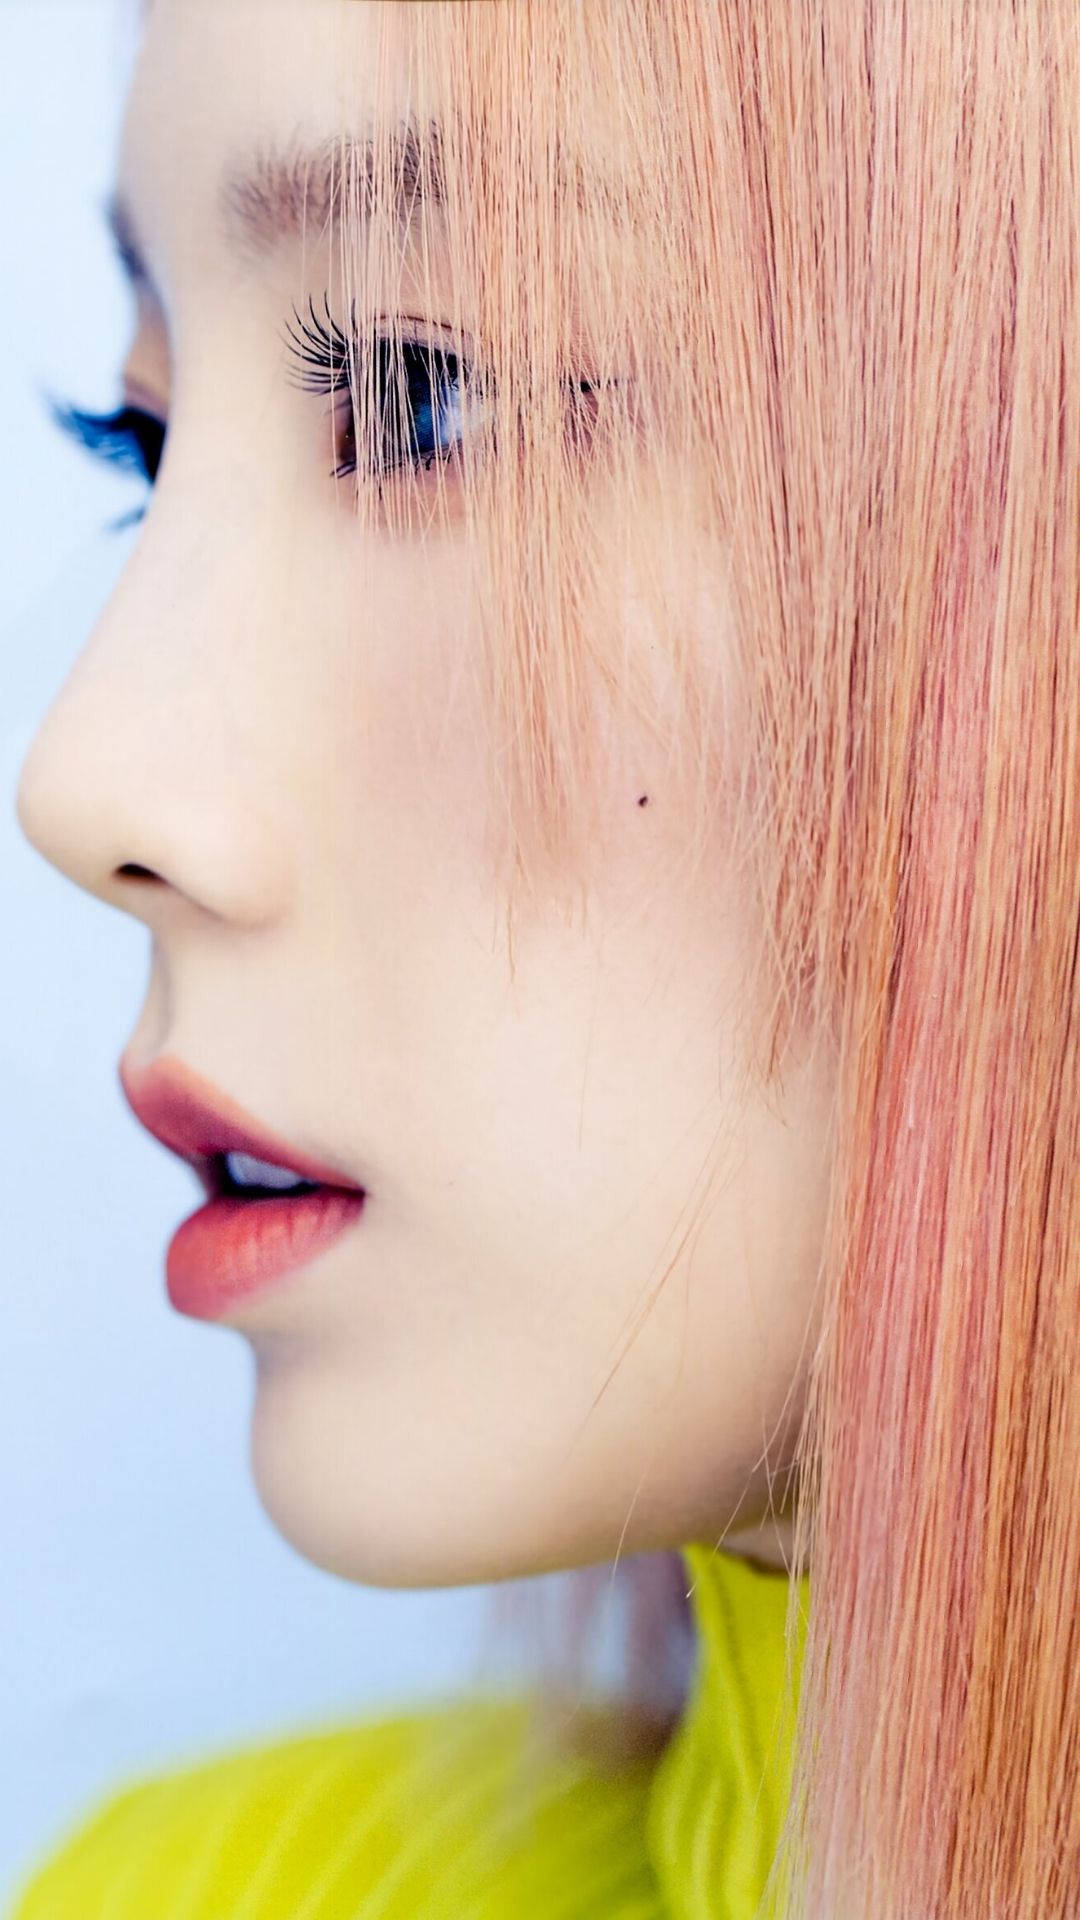 Perfillateral Da Taeyeon - Referring To A Computer Or Mobile Wallpaper That Portrays A Side Profile Of Taeyeon, A South Korean Singer. Papel de Parede